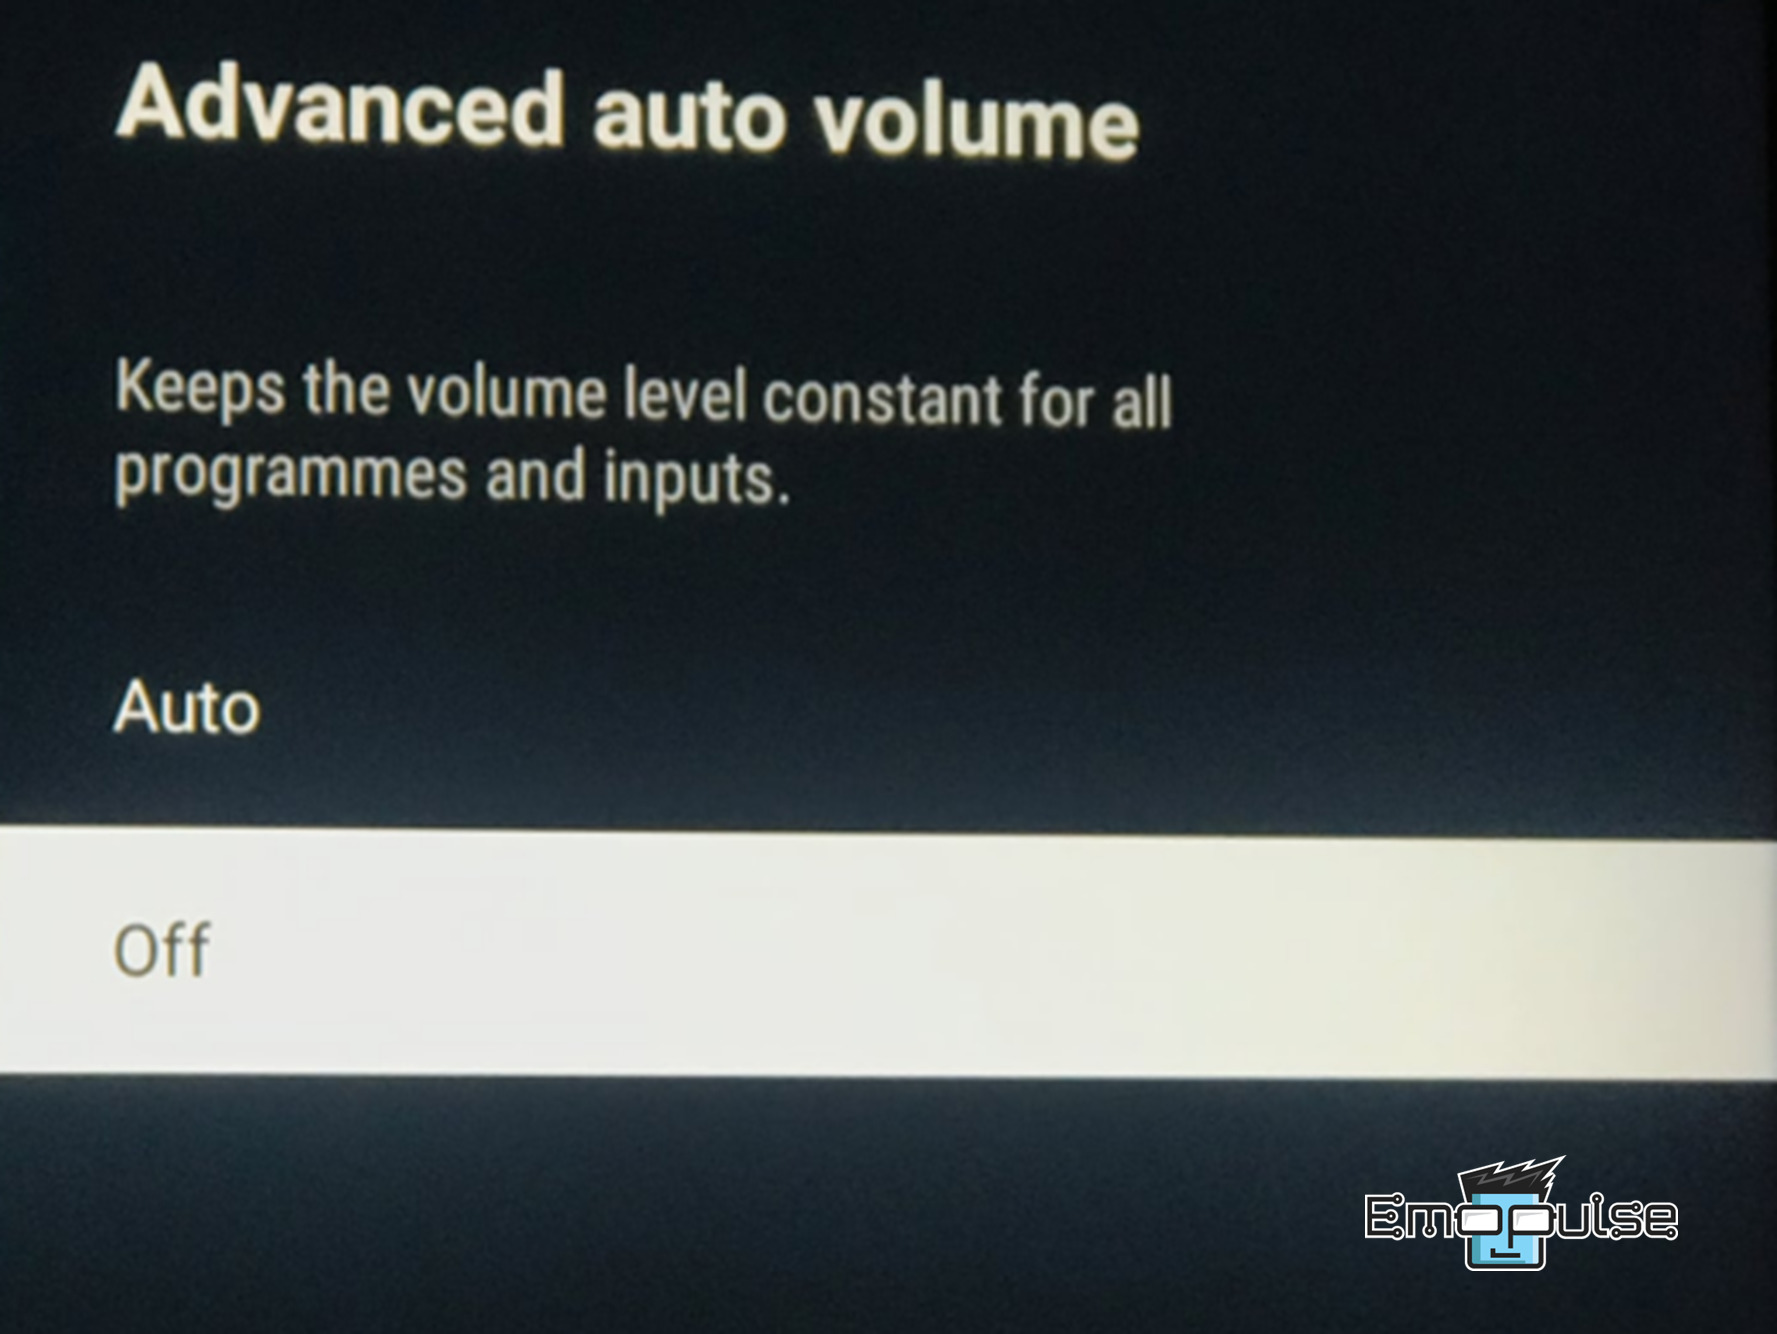 Resolved Hulu Commercials So Loud issue by using Auto volume feature in Sony TV